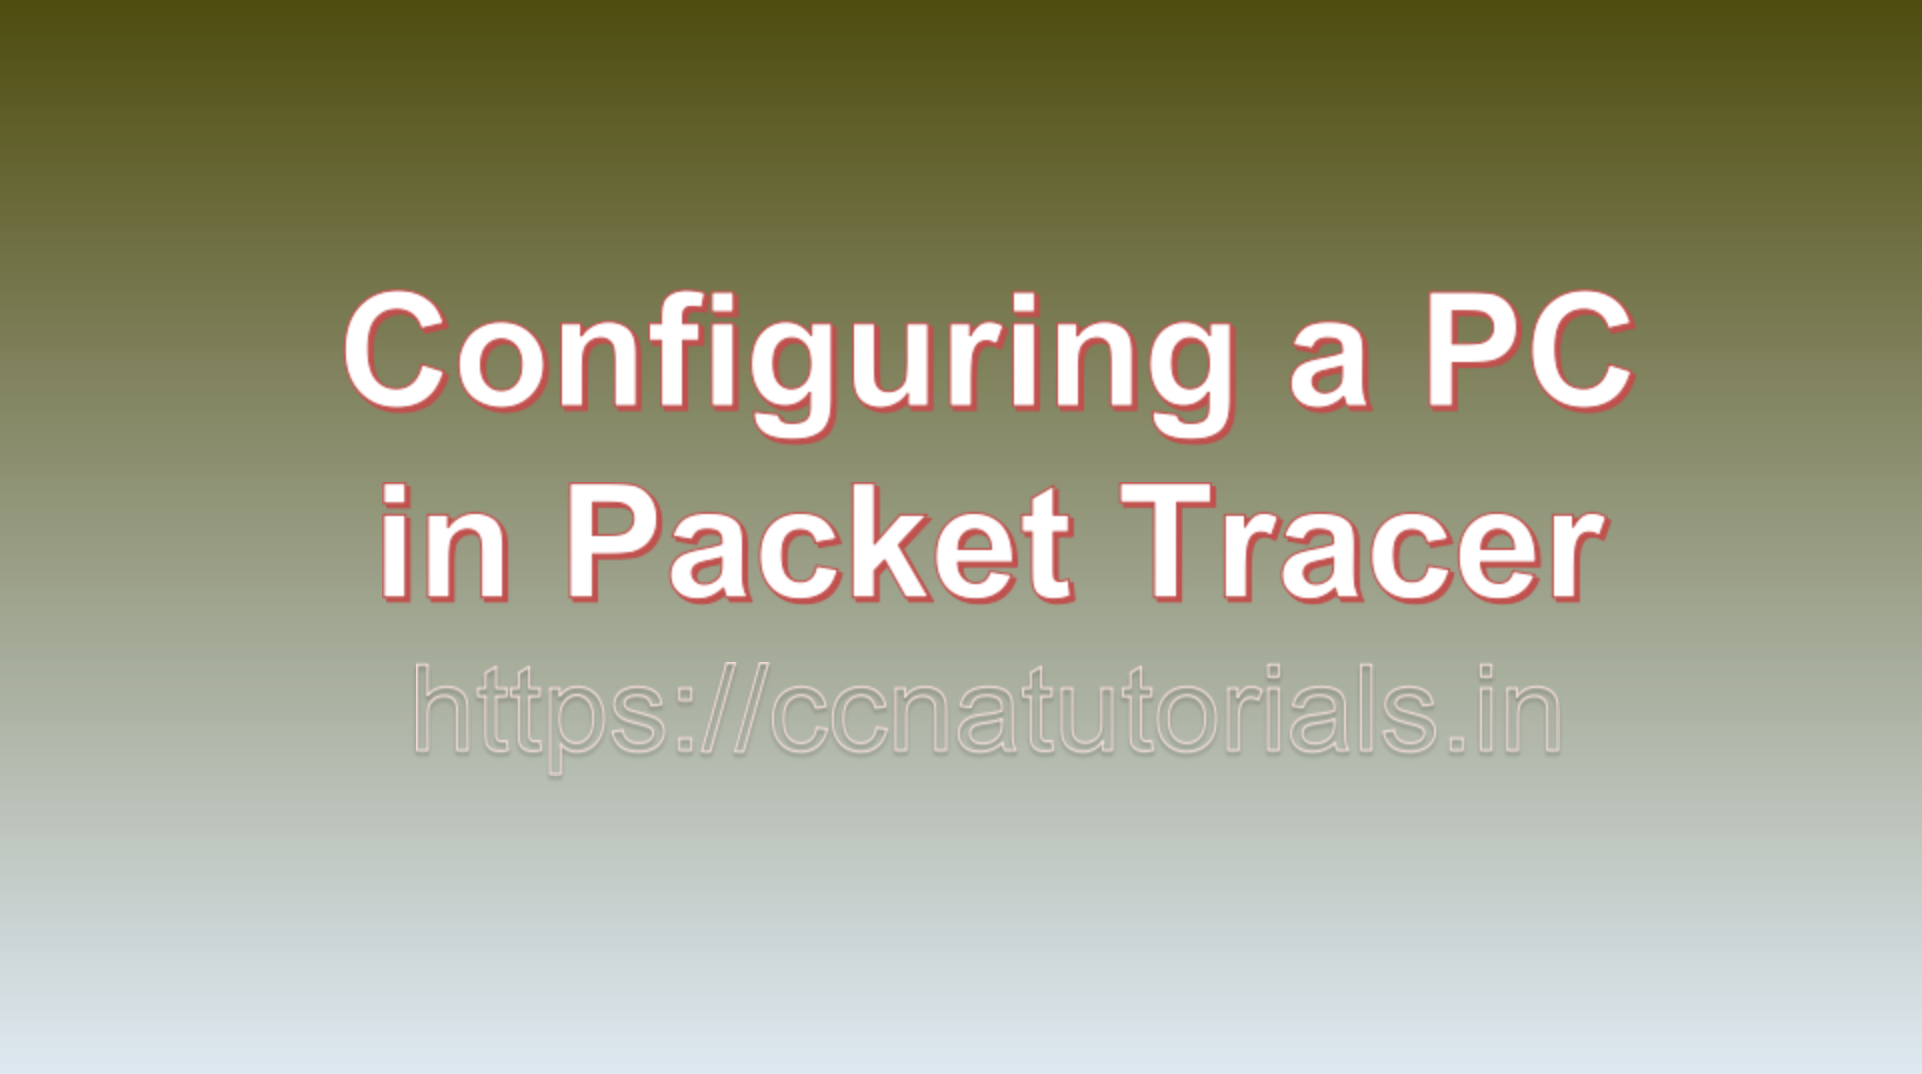 Configuring a PC in Packet Tracer , ccna, ccna tutorials